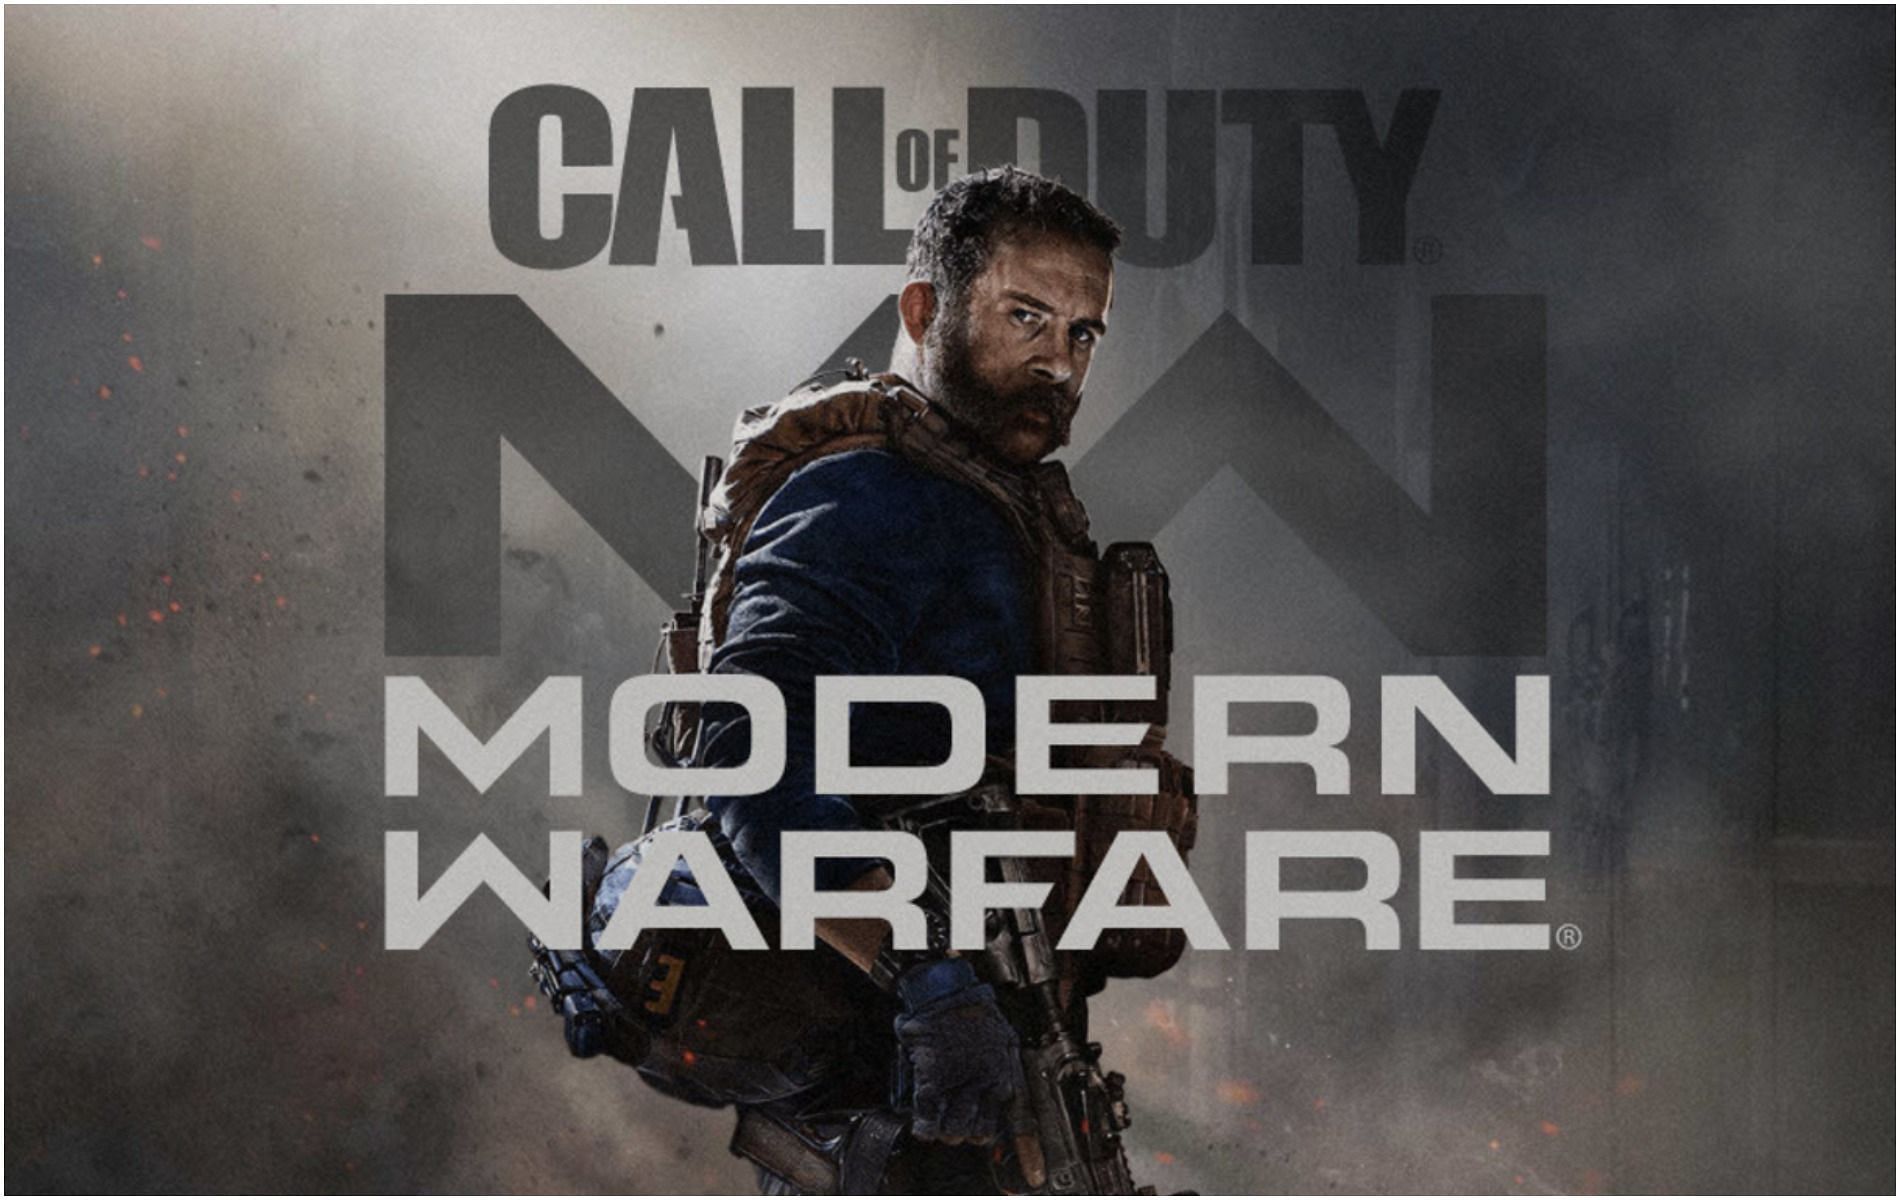 Is the new Call of Duty Modern Warfare worth buying or is it the